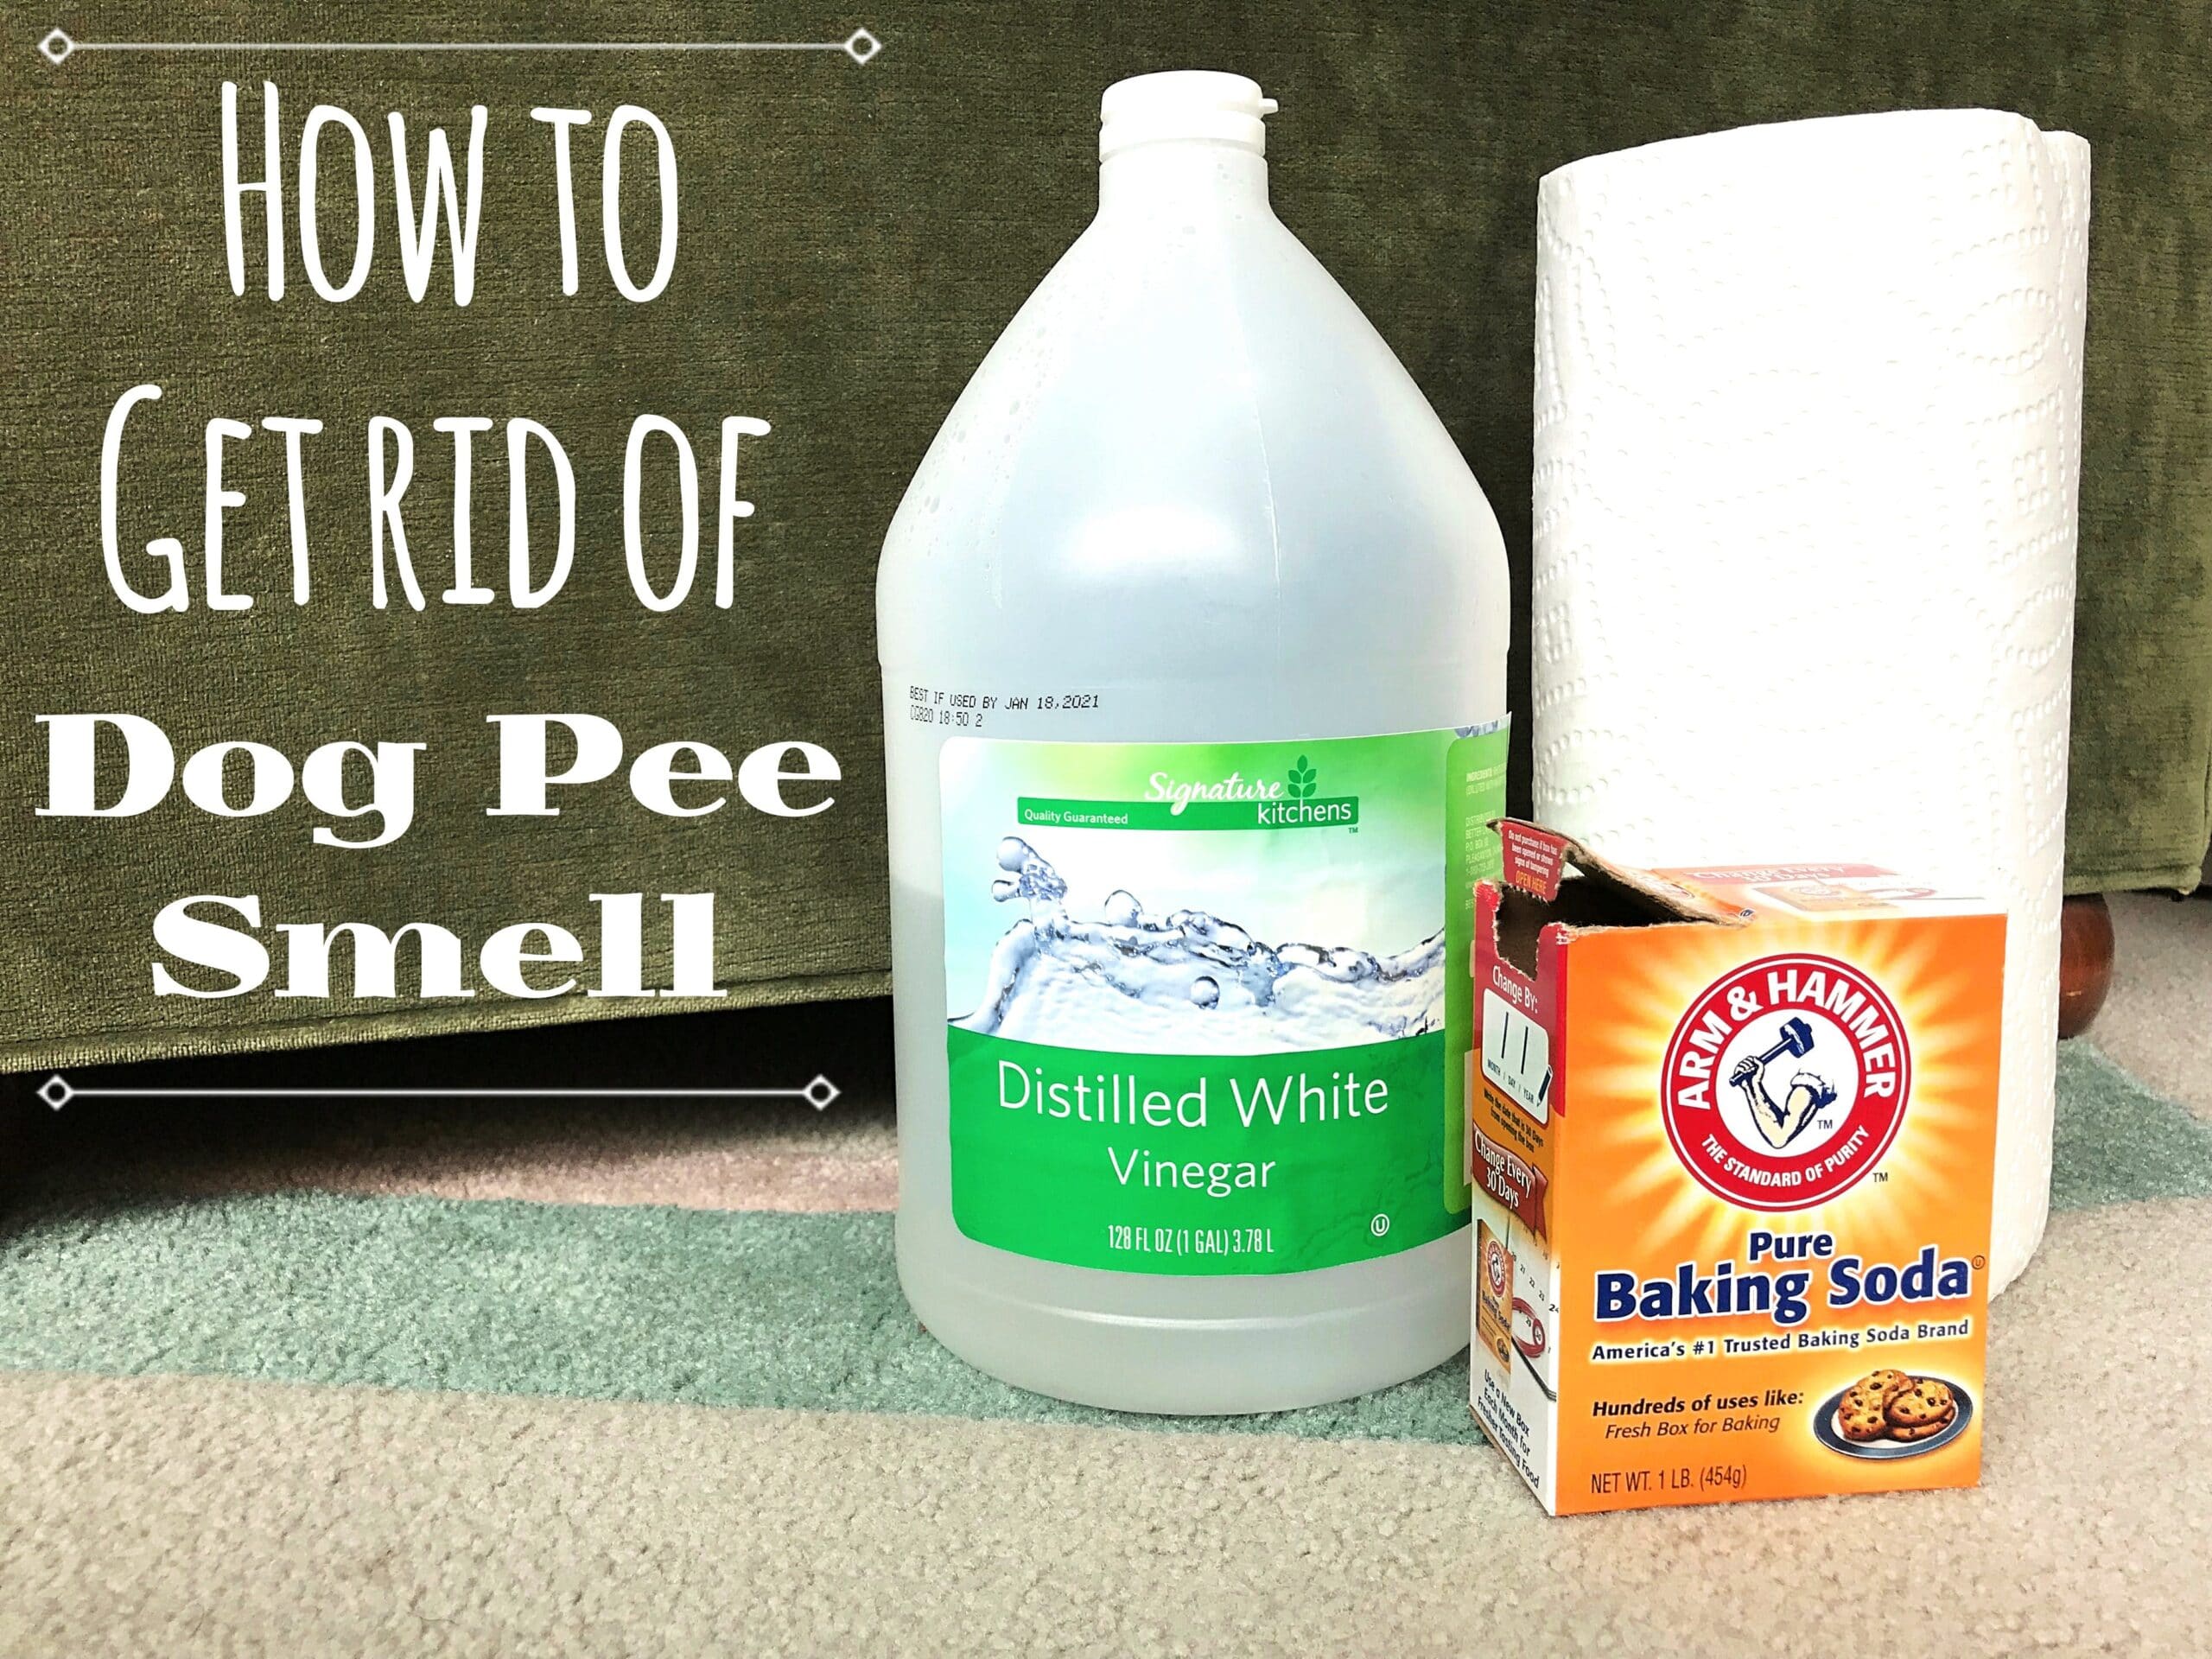 how-to-clean-dog-urine-from-carpet-2